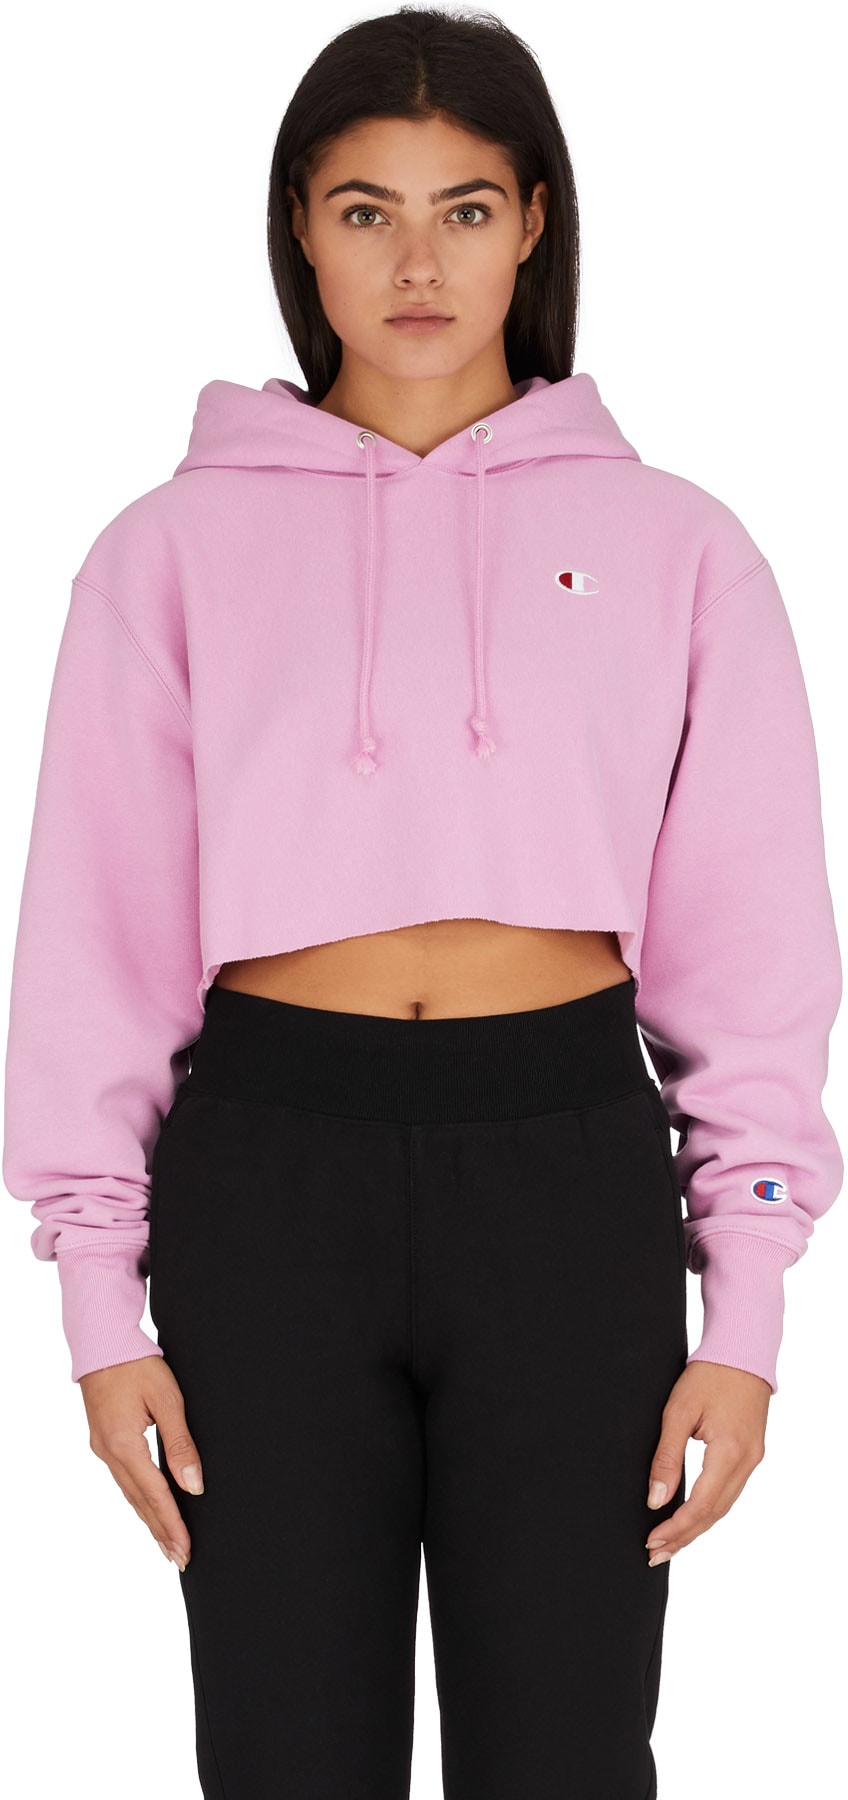 champion paper orchid hoodie